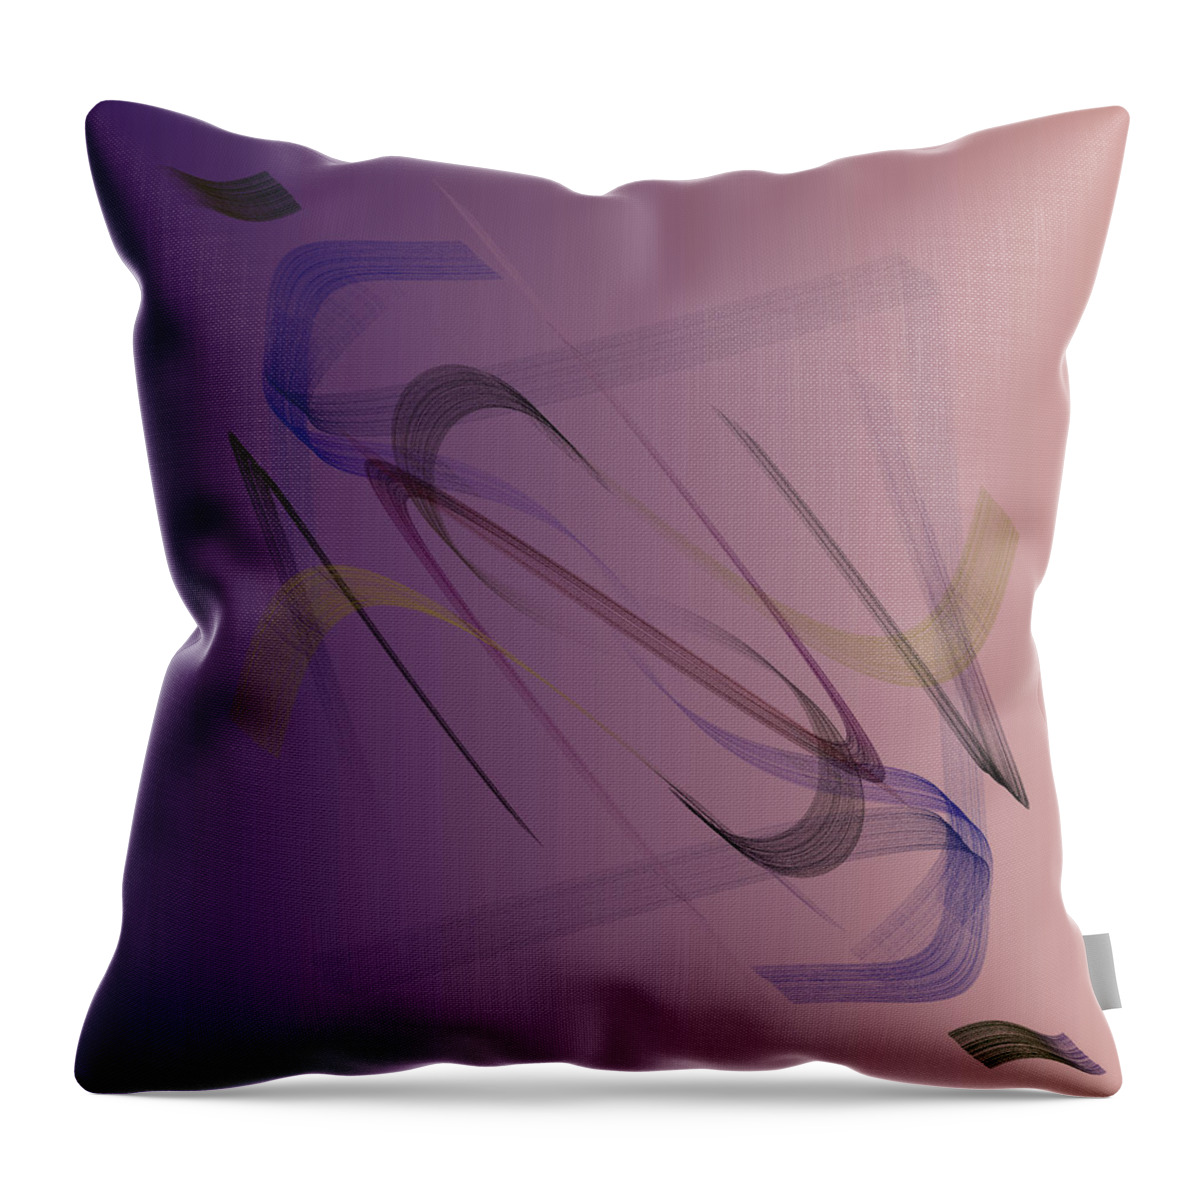 5040 Throw Pillow featuring the digital art 5040.25.12 #50402512 by Gareth Lewis